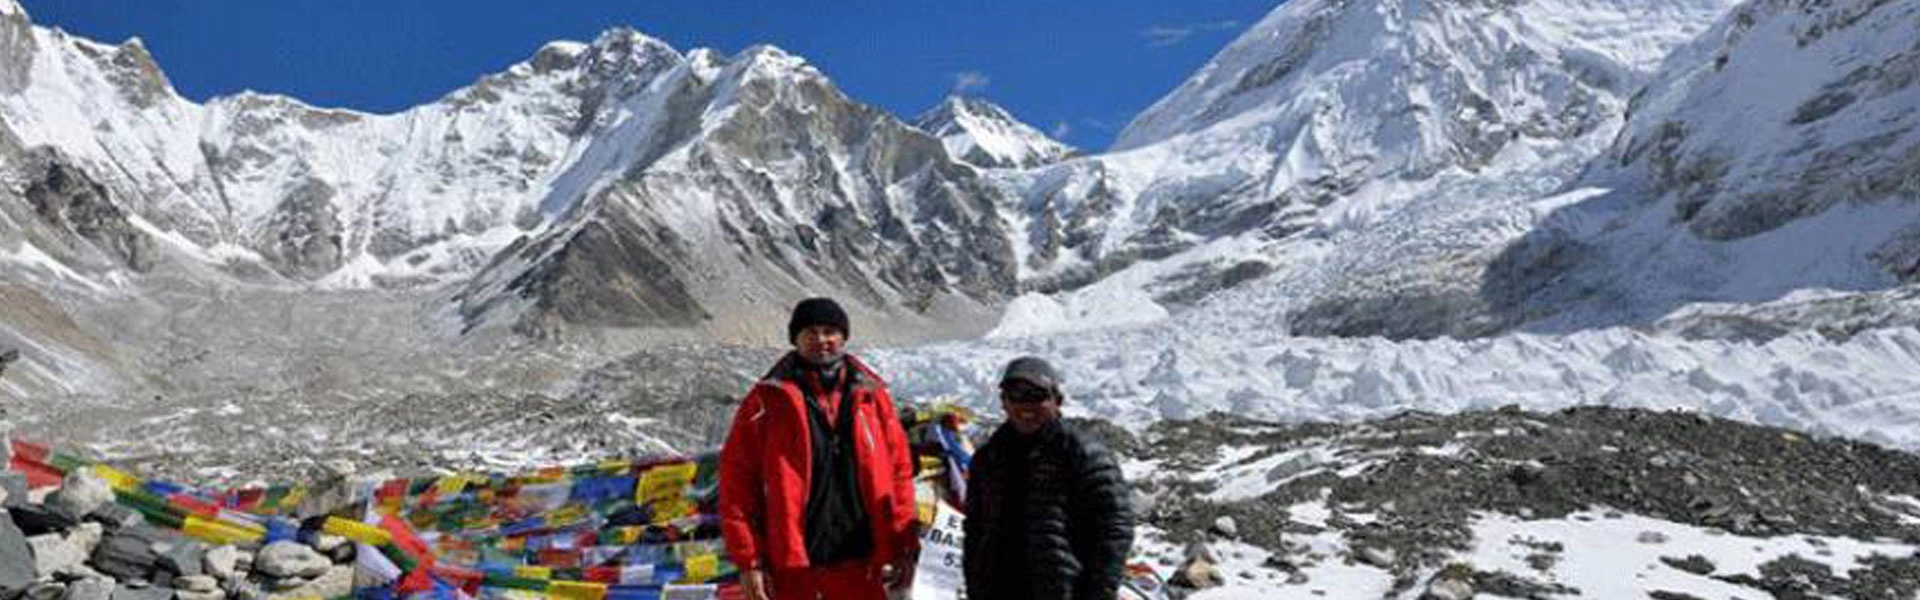 How to Get to Everest Base Camp